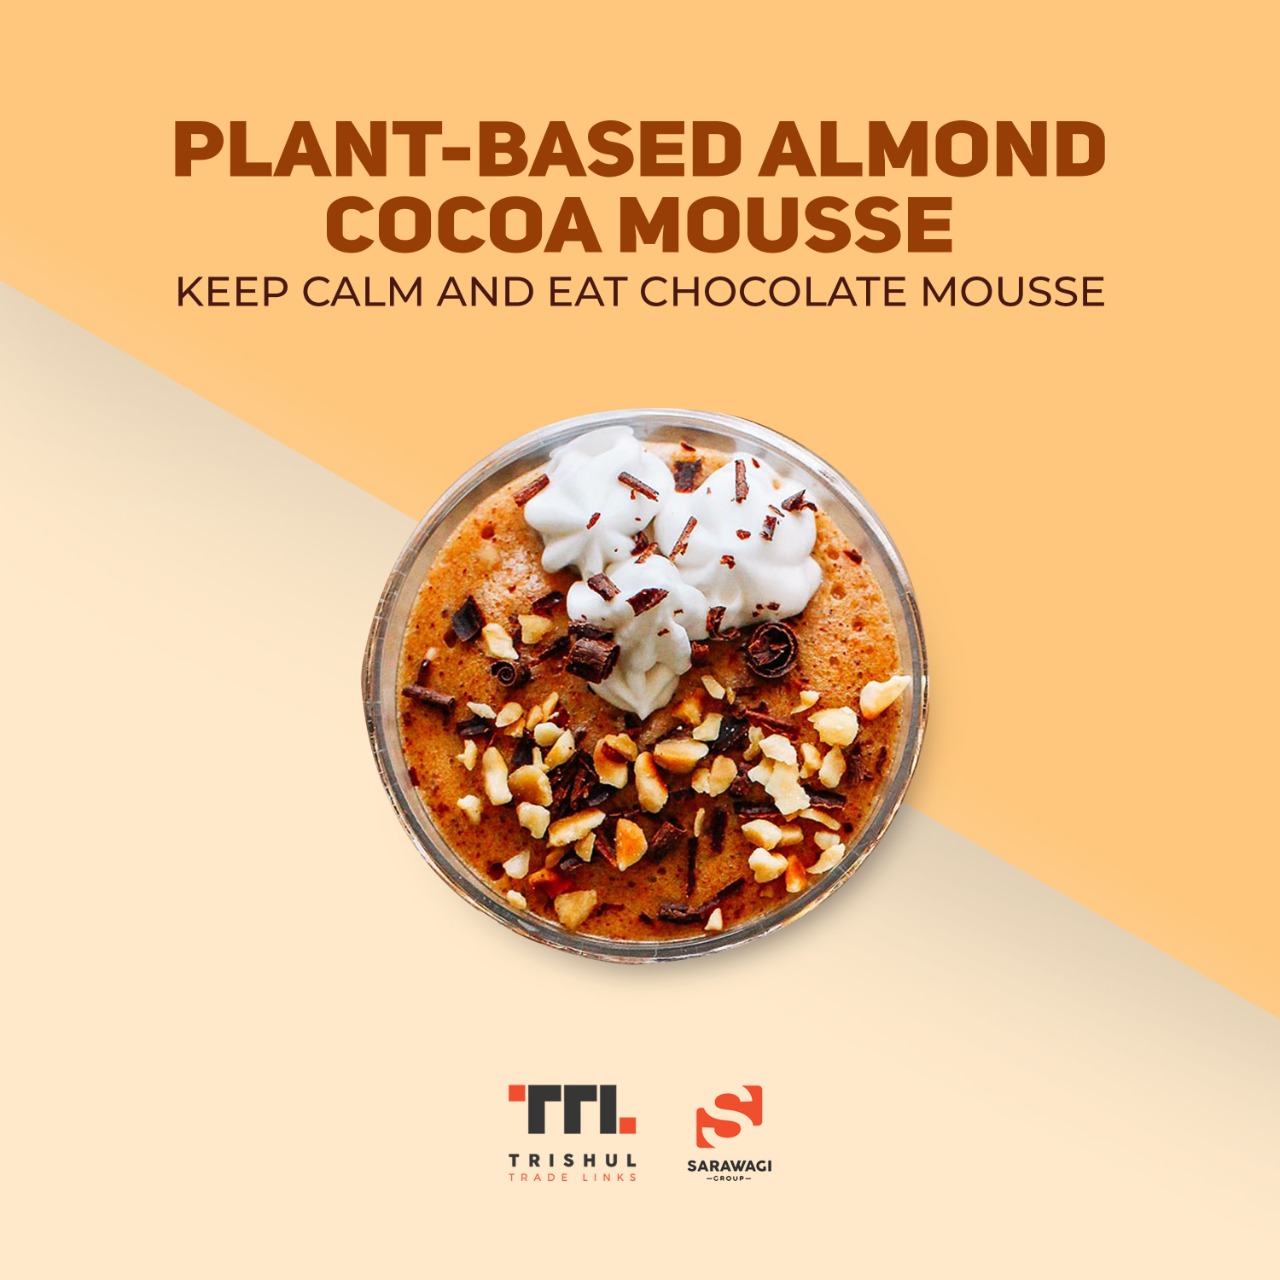 PLANT-BASED ALMOND COCOA MOUSSE 🎂 Image